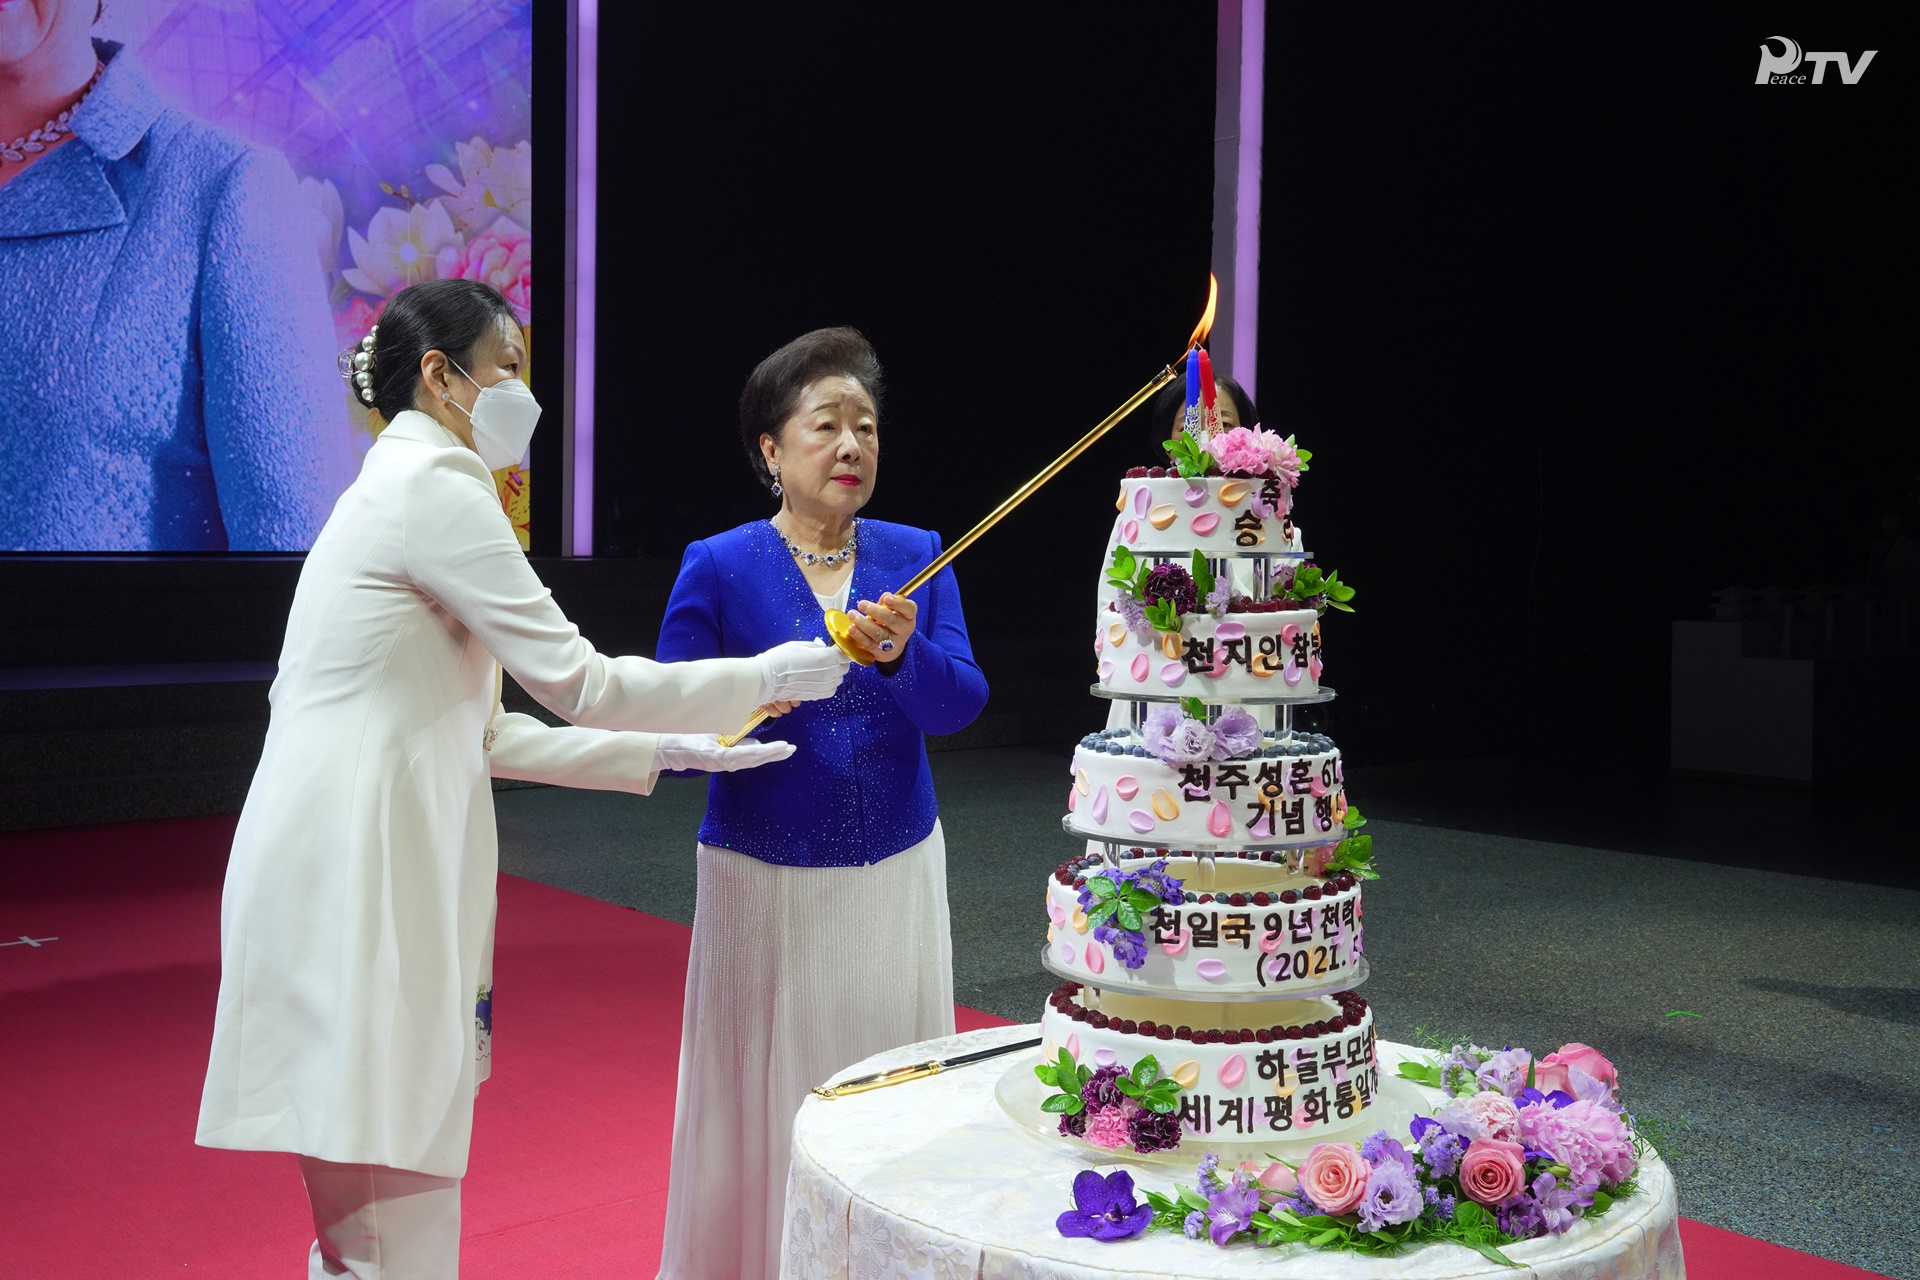 Victory Report Celebration to Mark the 61st Anniversary of True Parents' Holy Wedding (May 10)